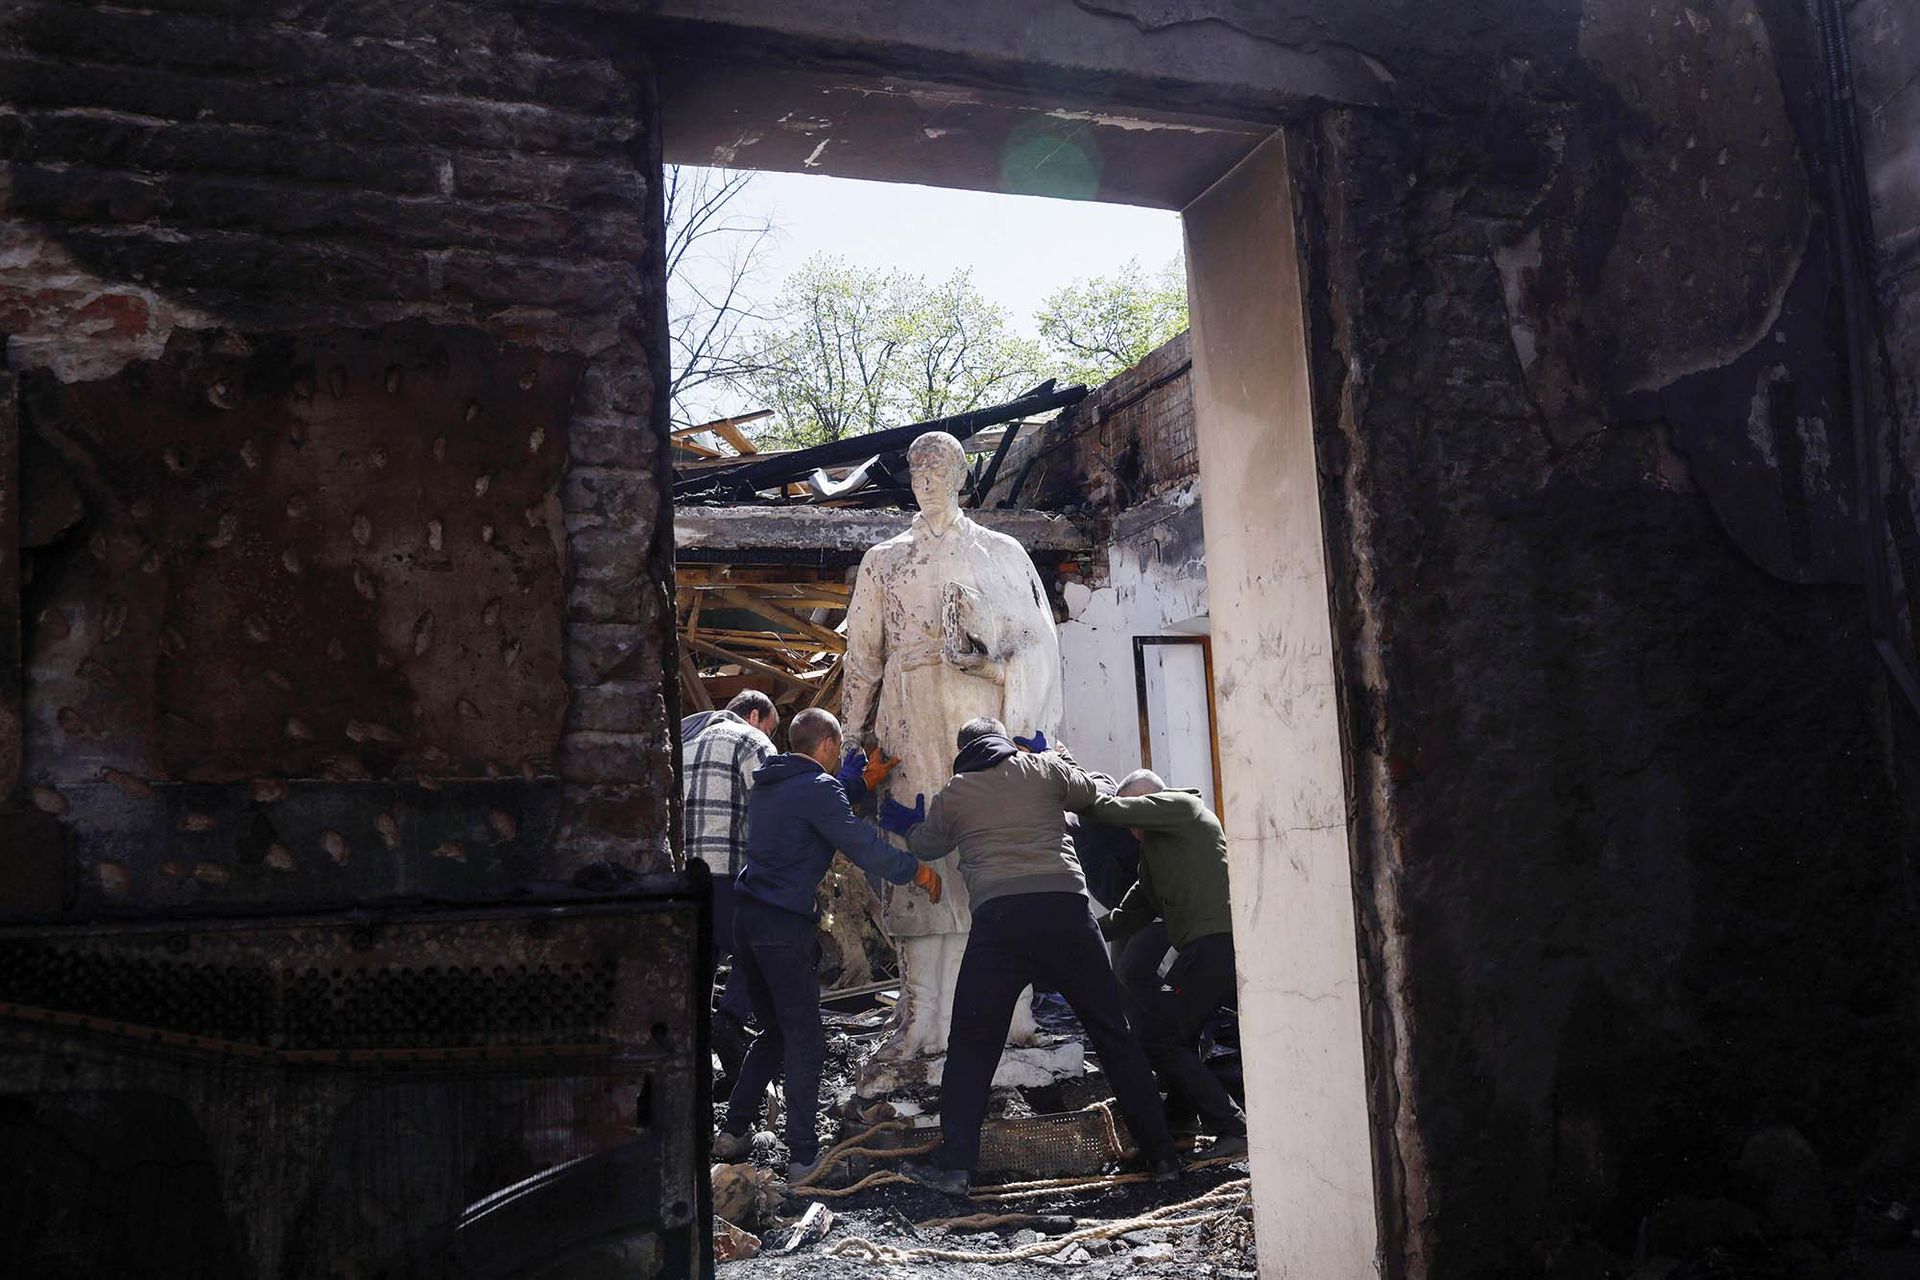 Workers remove a statue at the Hryhoriy Skovoroda Literary Memorial Museum, near Kharkiv, following Russian bombing. Ukraine’s heritage has suffered catastrophic damage during the Russian invasion Ricardo Moraes/REUTERS



